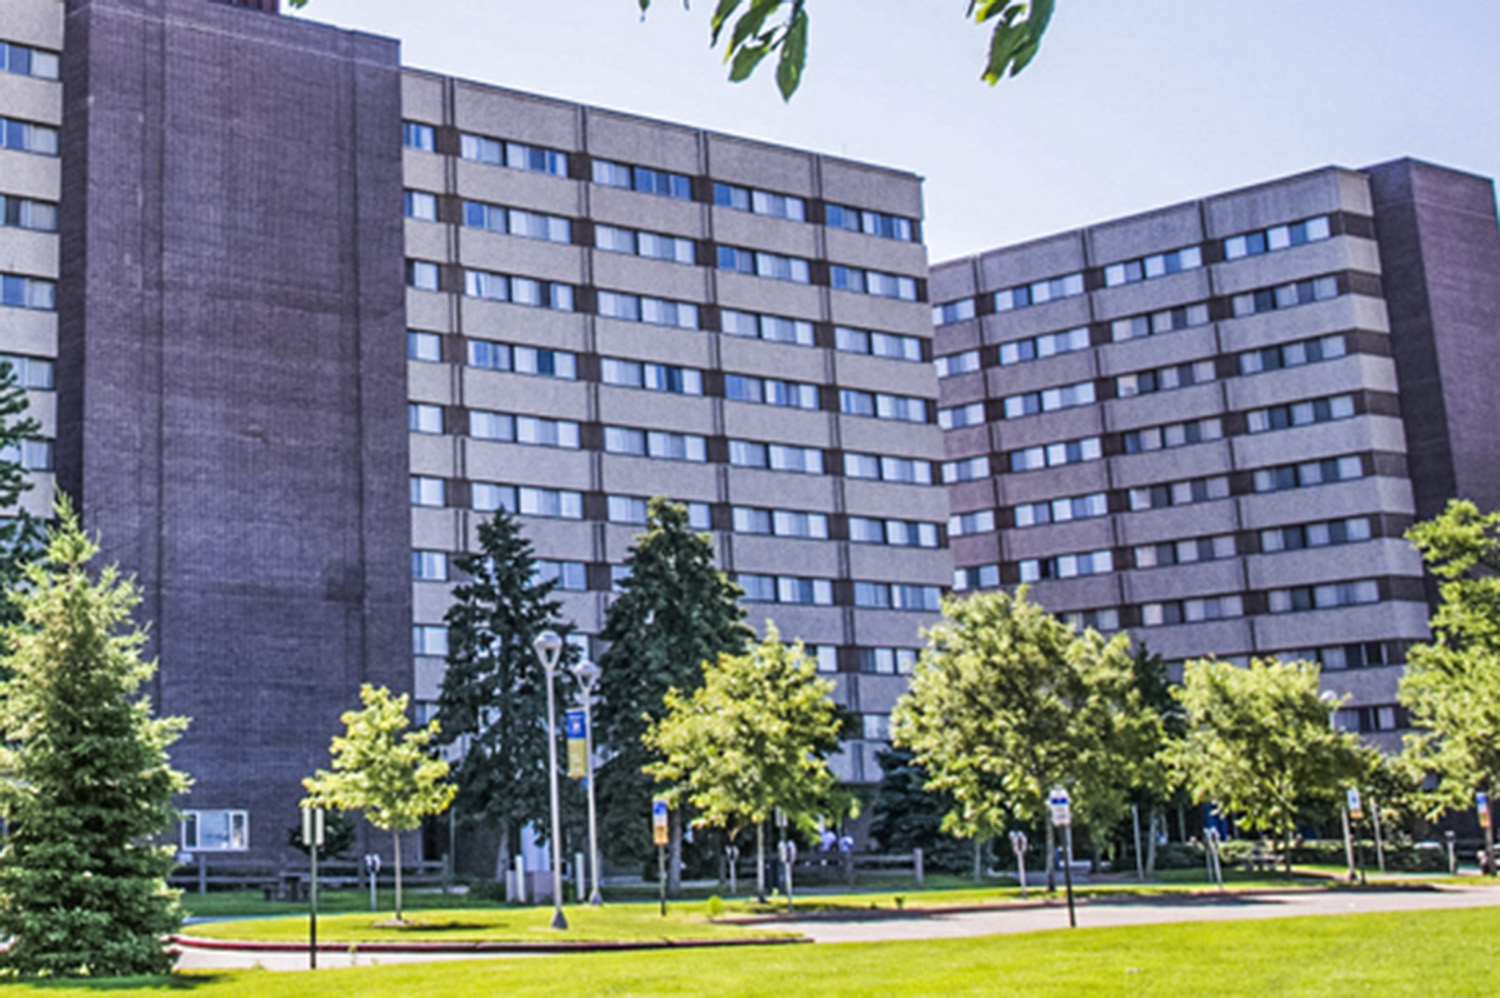 UW Eau Claire Towers Hall image 1